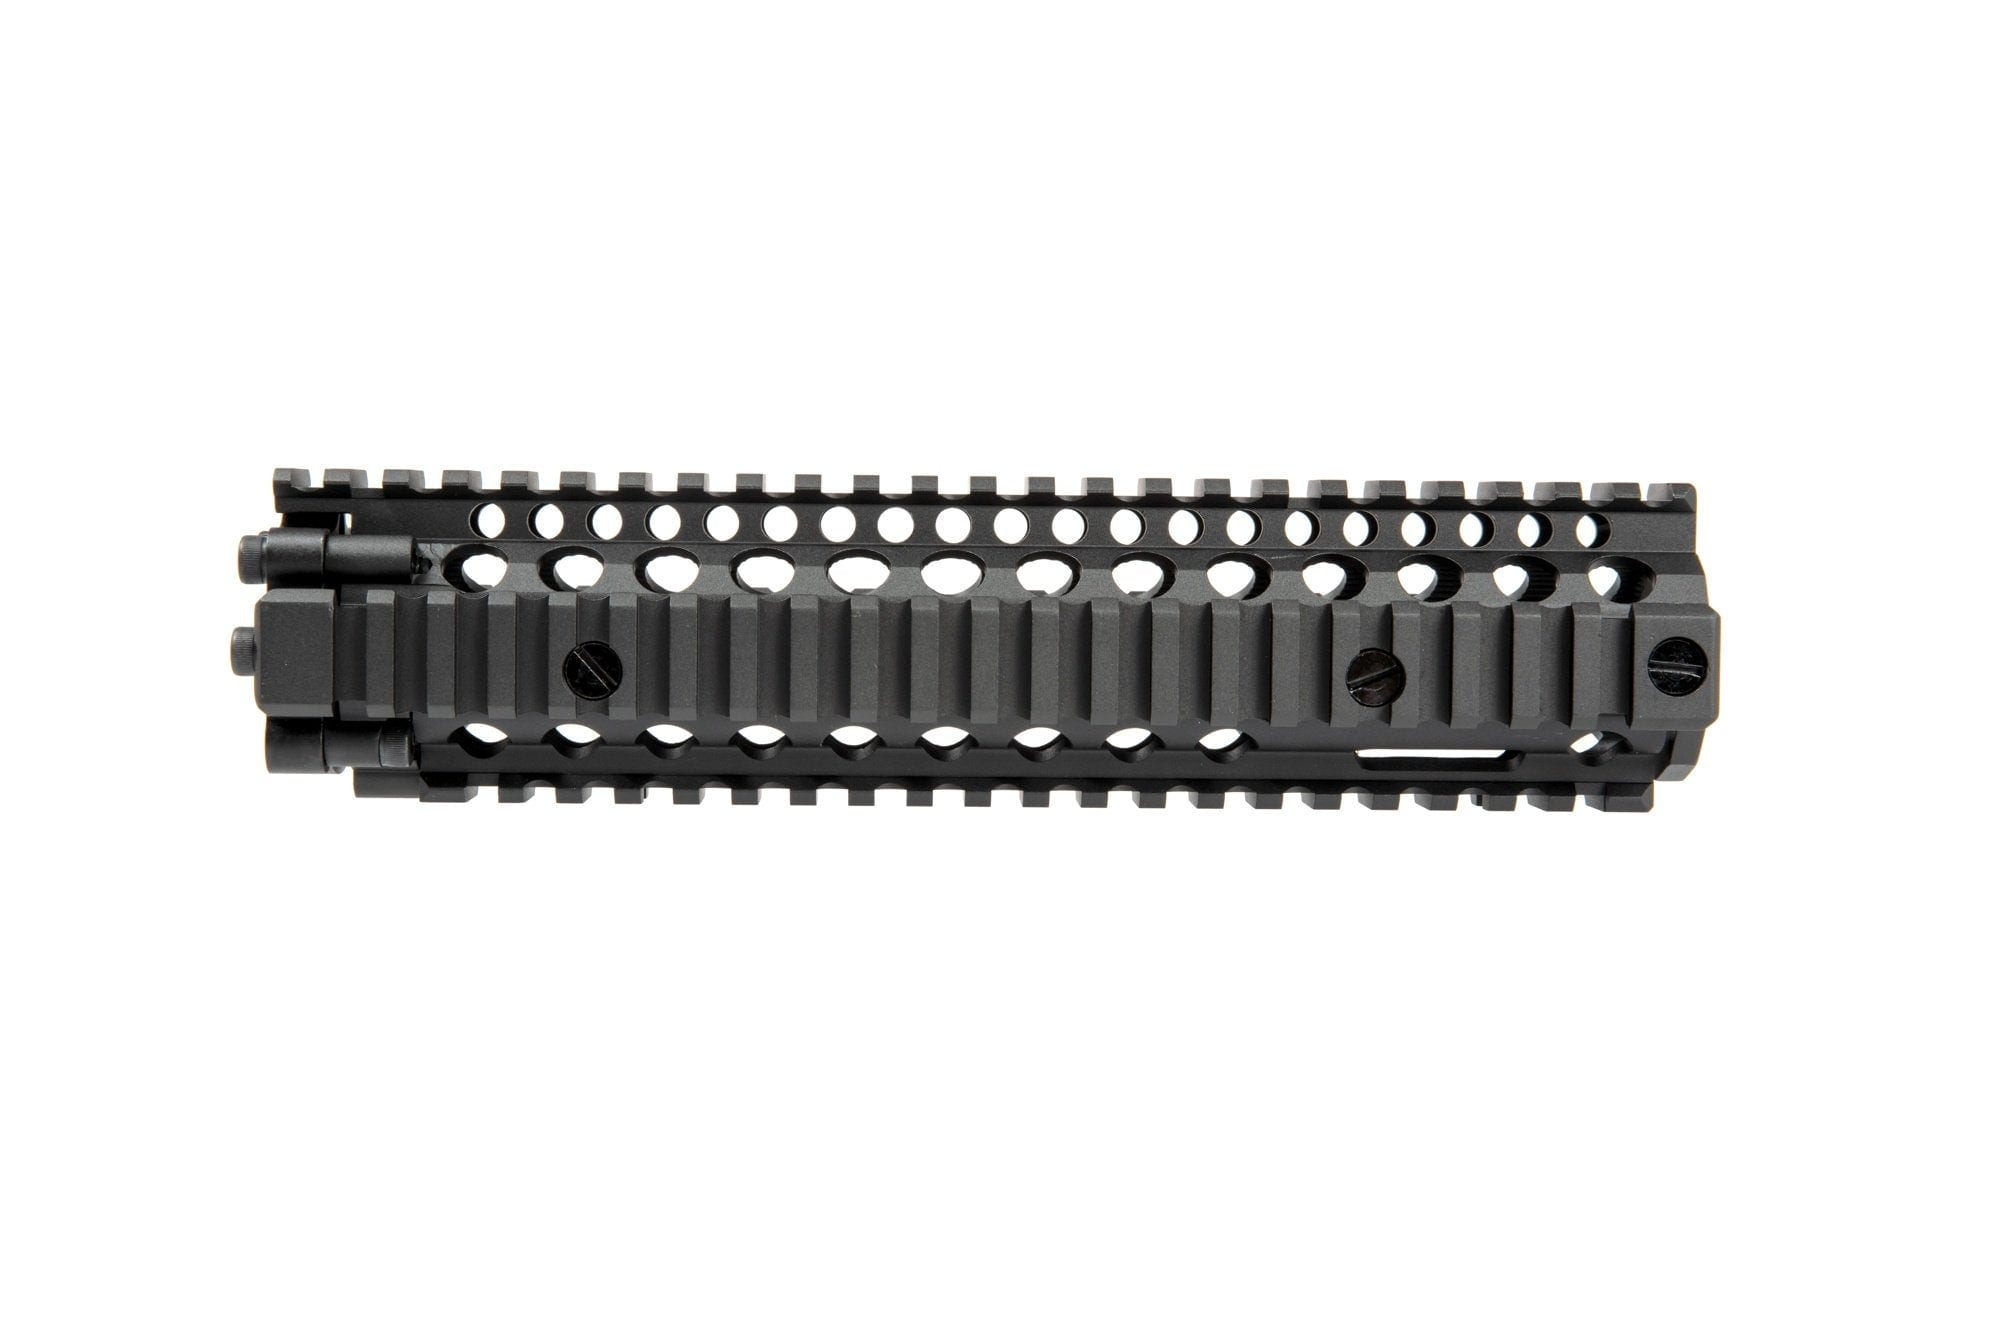 MK18 9.5" Mounting Rail for M4/M16 by CYMA on Airsoft Mania Europe